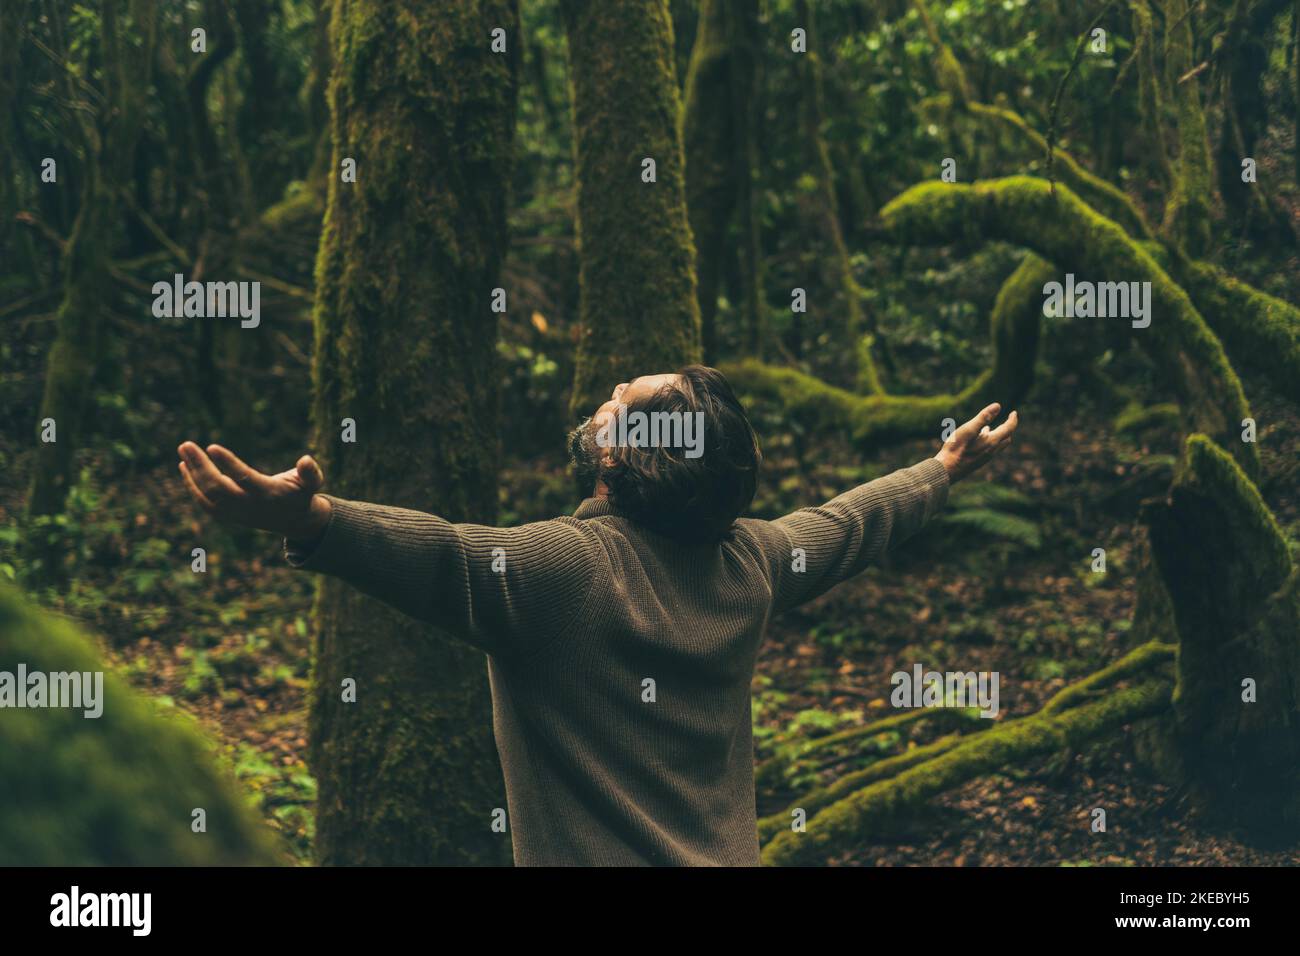 Back view of free man opening arms in the nature with green trees and forest in background. Concept of outdoors leisure activity and environment lifestyle. People enjoying woods earth planet future Stock Photo